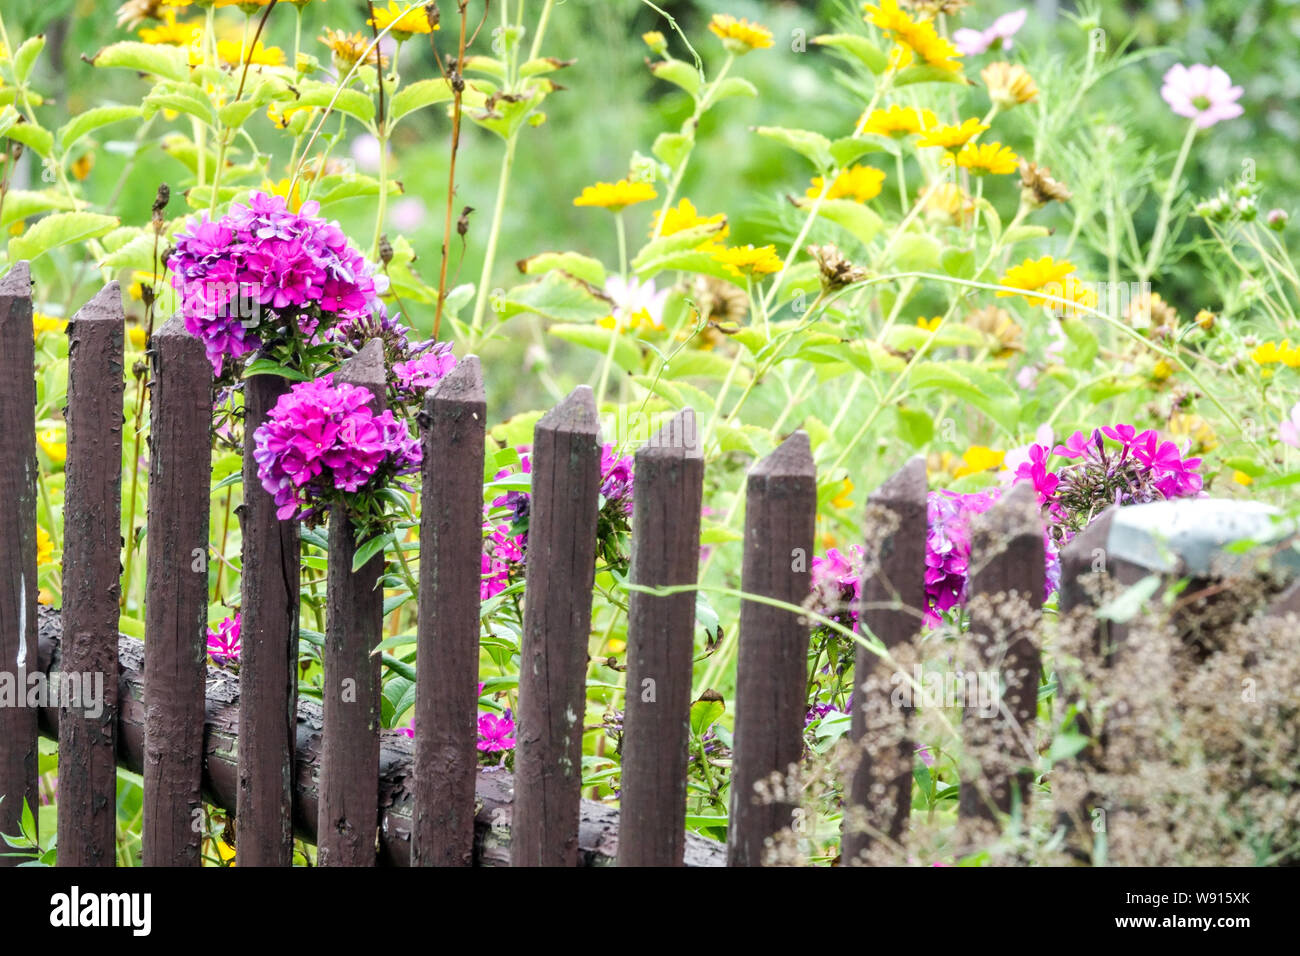 Colorful garden fence, old wooden fence, violet phlox flowers august, rural garden Stock Photo